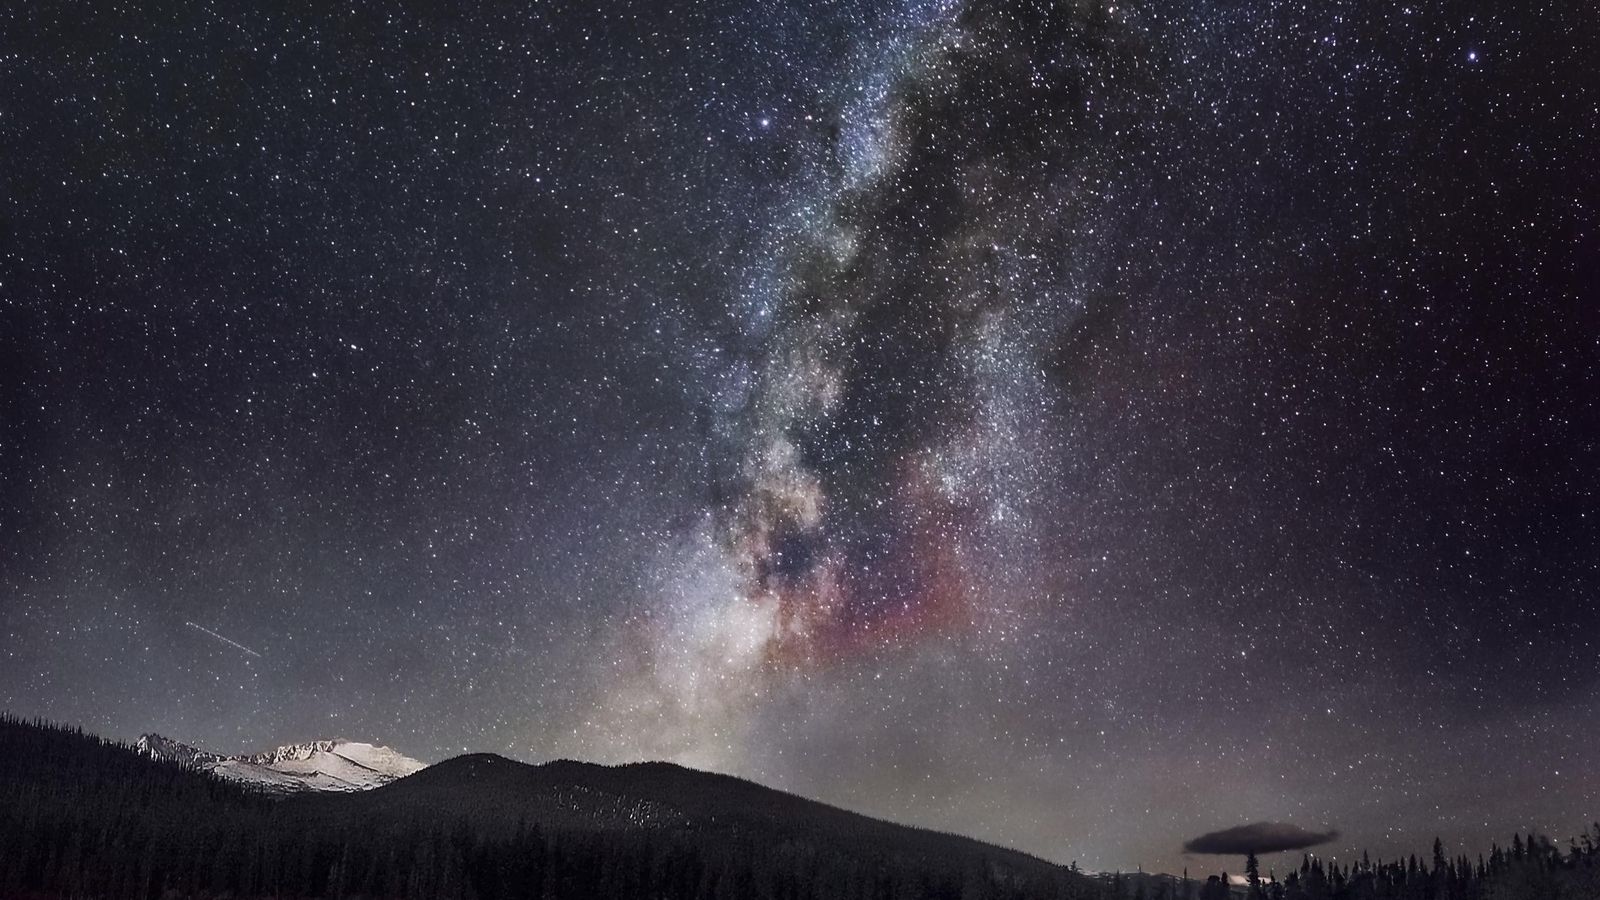 Credit: Milky Way over Colorado - Max and Dee Bernt - CC BY